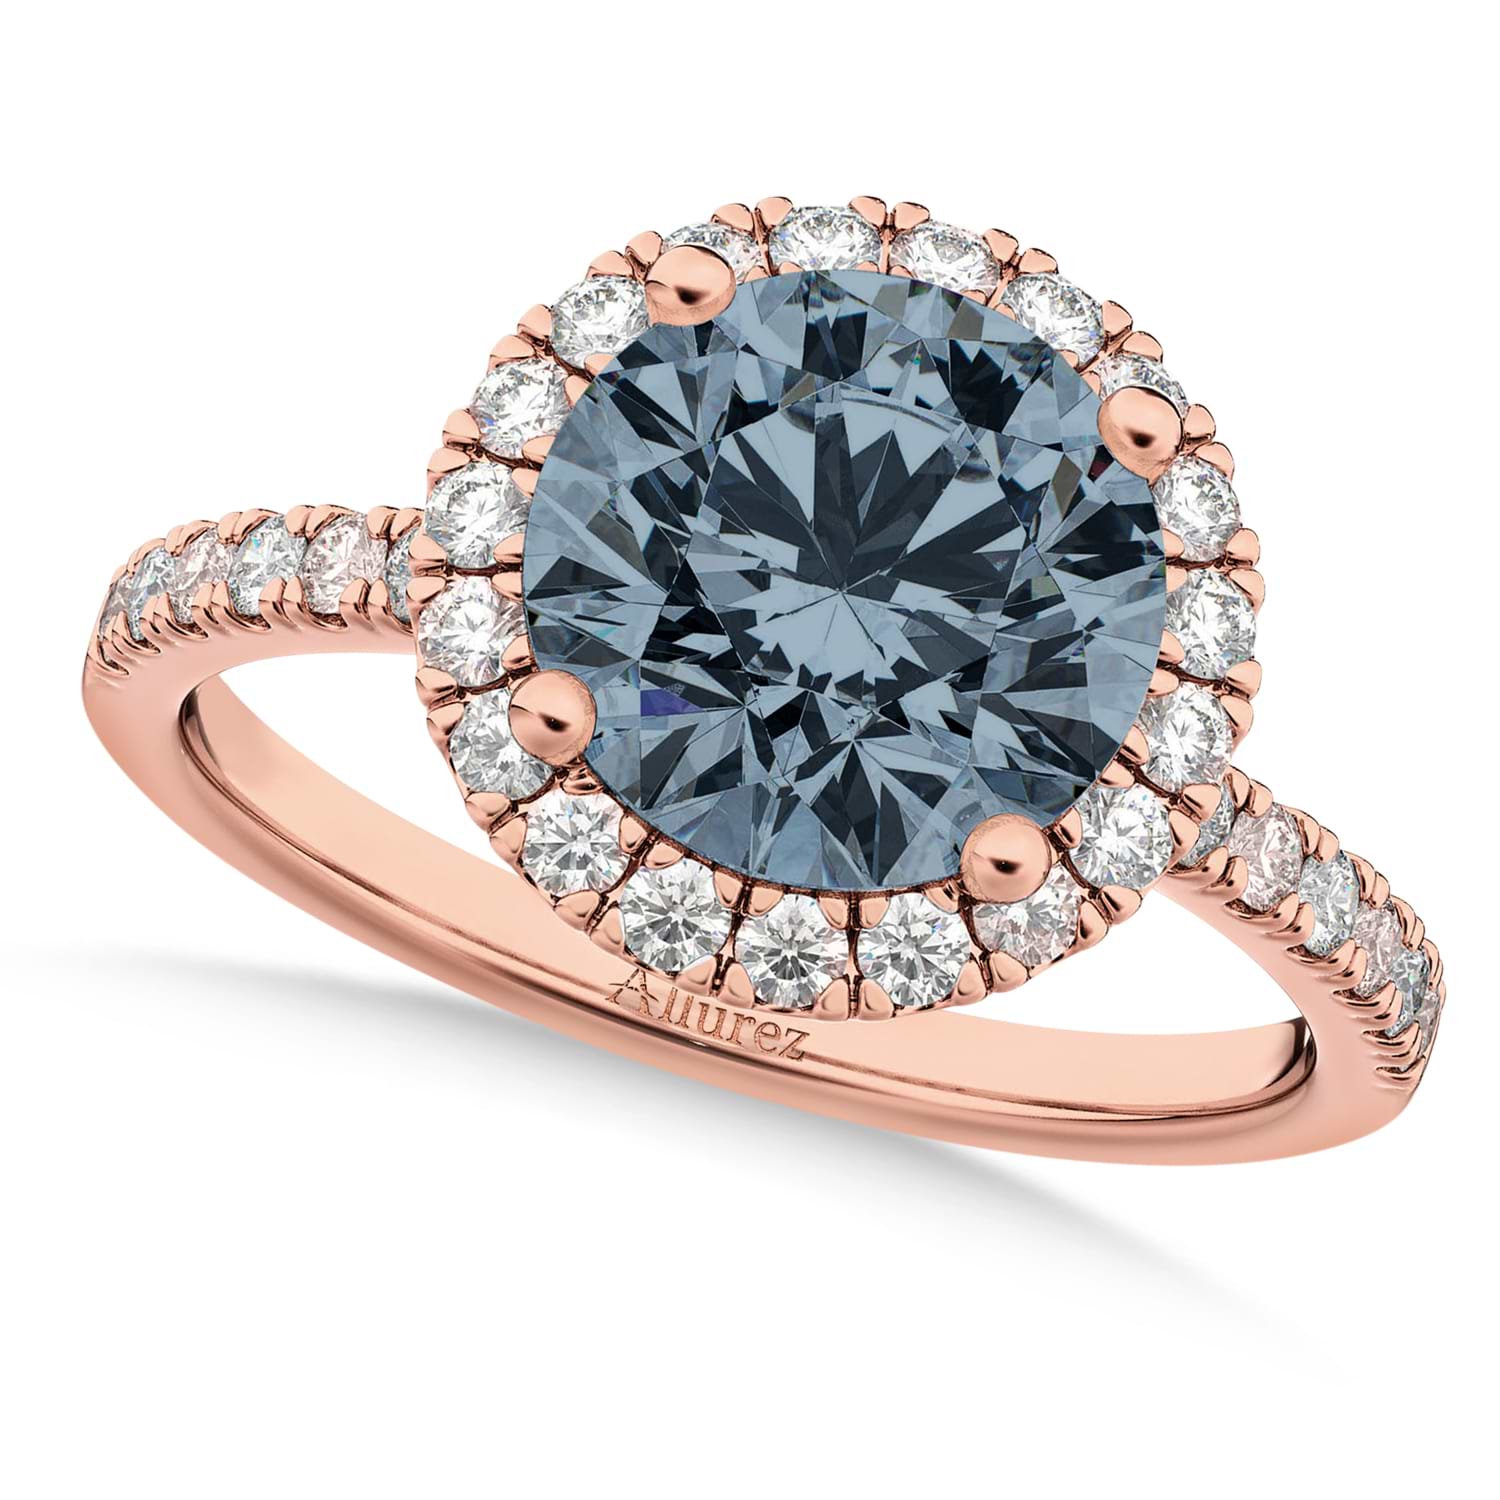 Halo Gray Spinel & Diamond Engagement Ring 18K Rose Gold 1.90ct